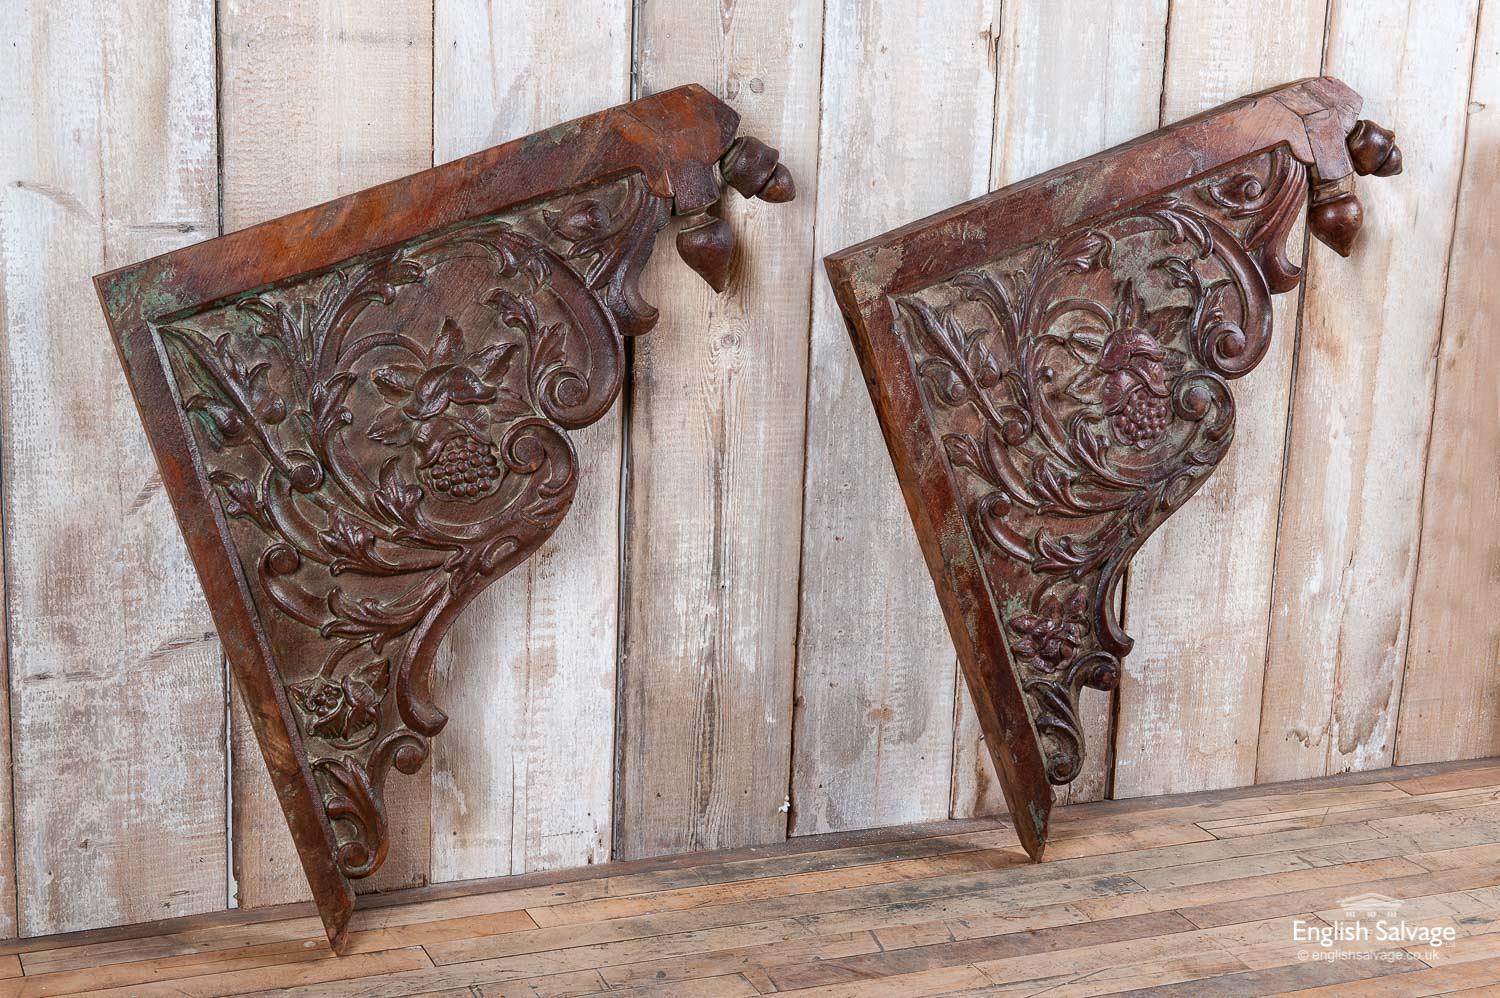 Salvaged ornately carved teak brackets with fuit and foliate design. The top front corners have double finials. The wood has an attractive patina with subtle paint on the flowers and fruit. The brackets appear to be in very good condition, with one